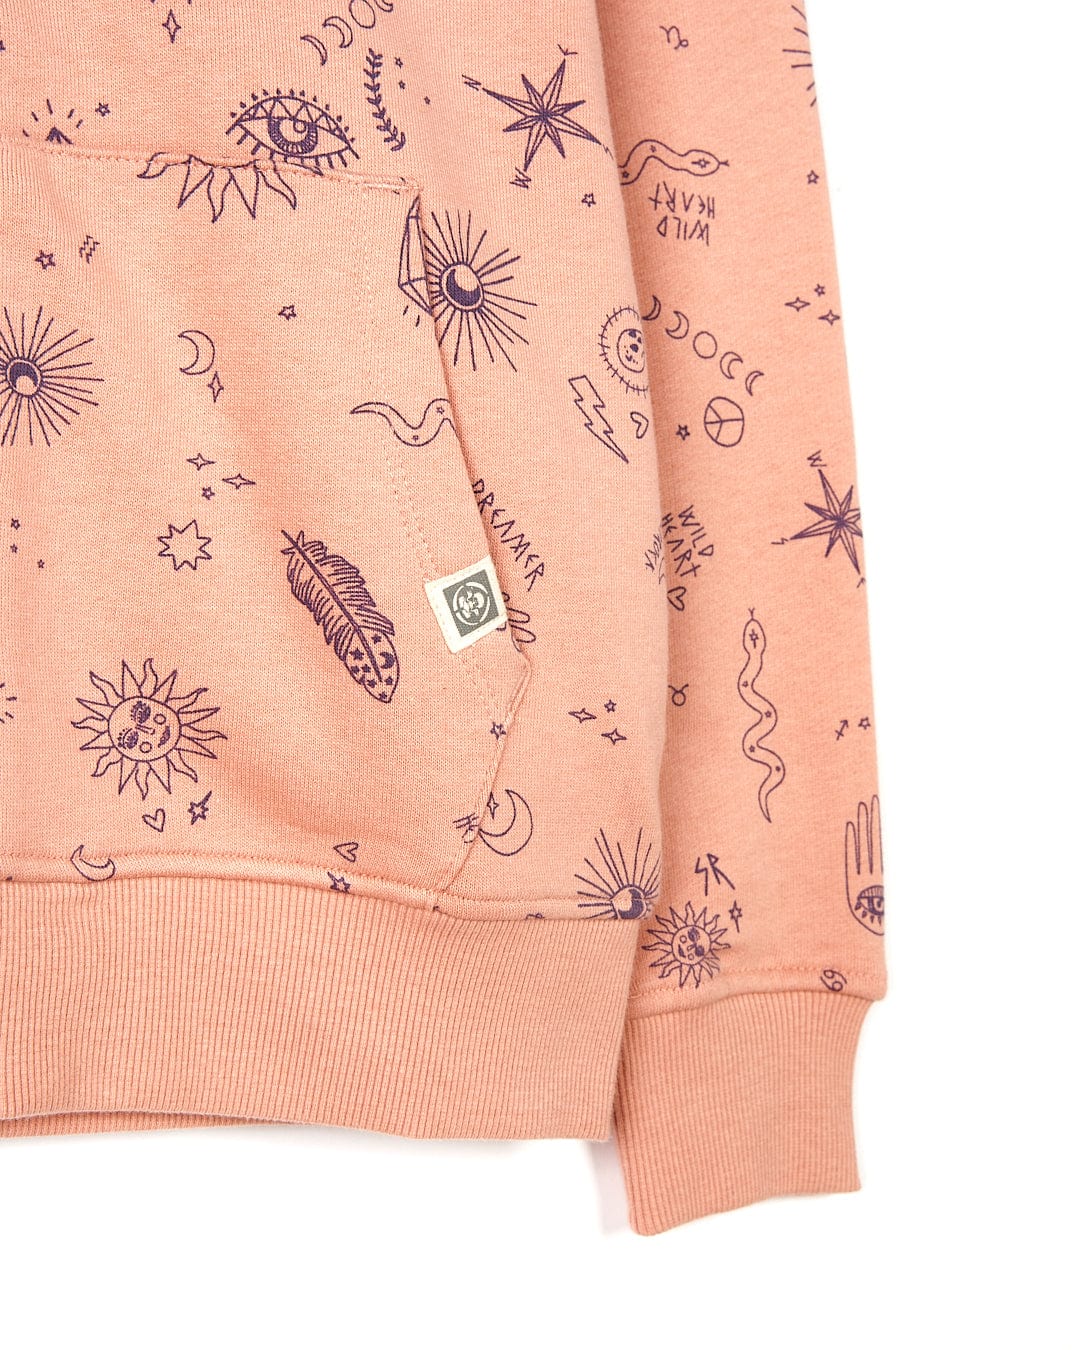 A Wild Heart - Kids Borg Lined Hoodie - Pink Saltrock hoodie embellished with stars and planets.